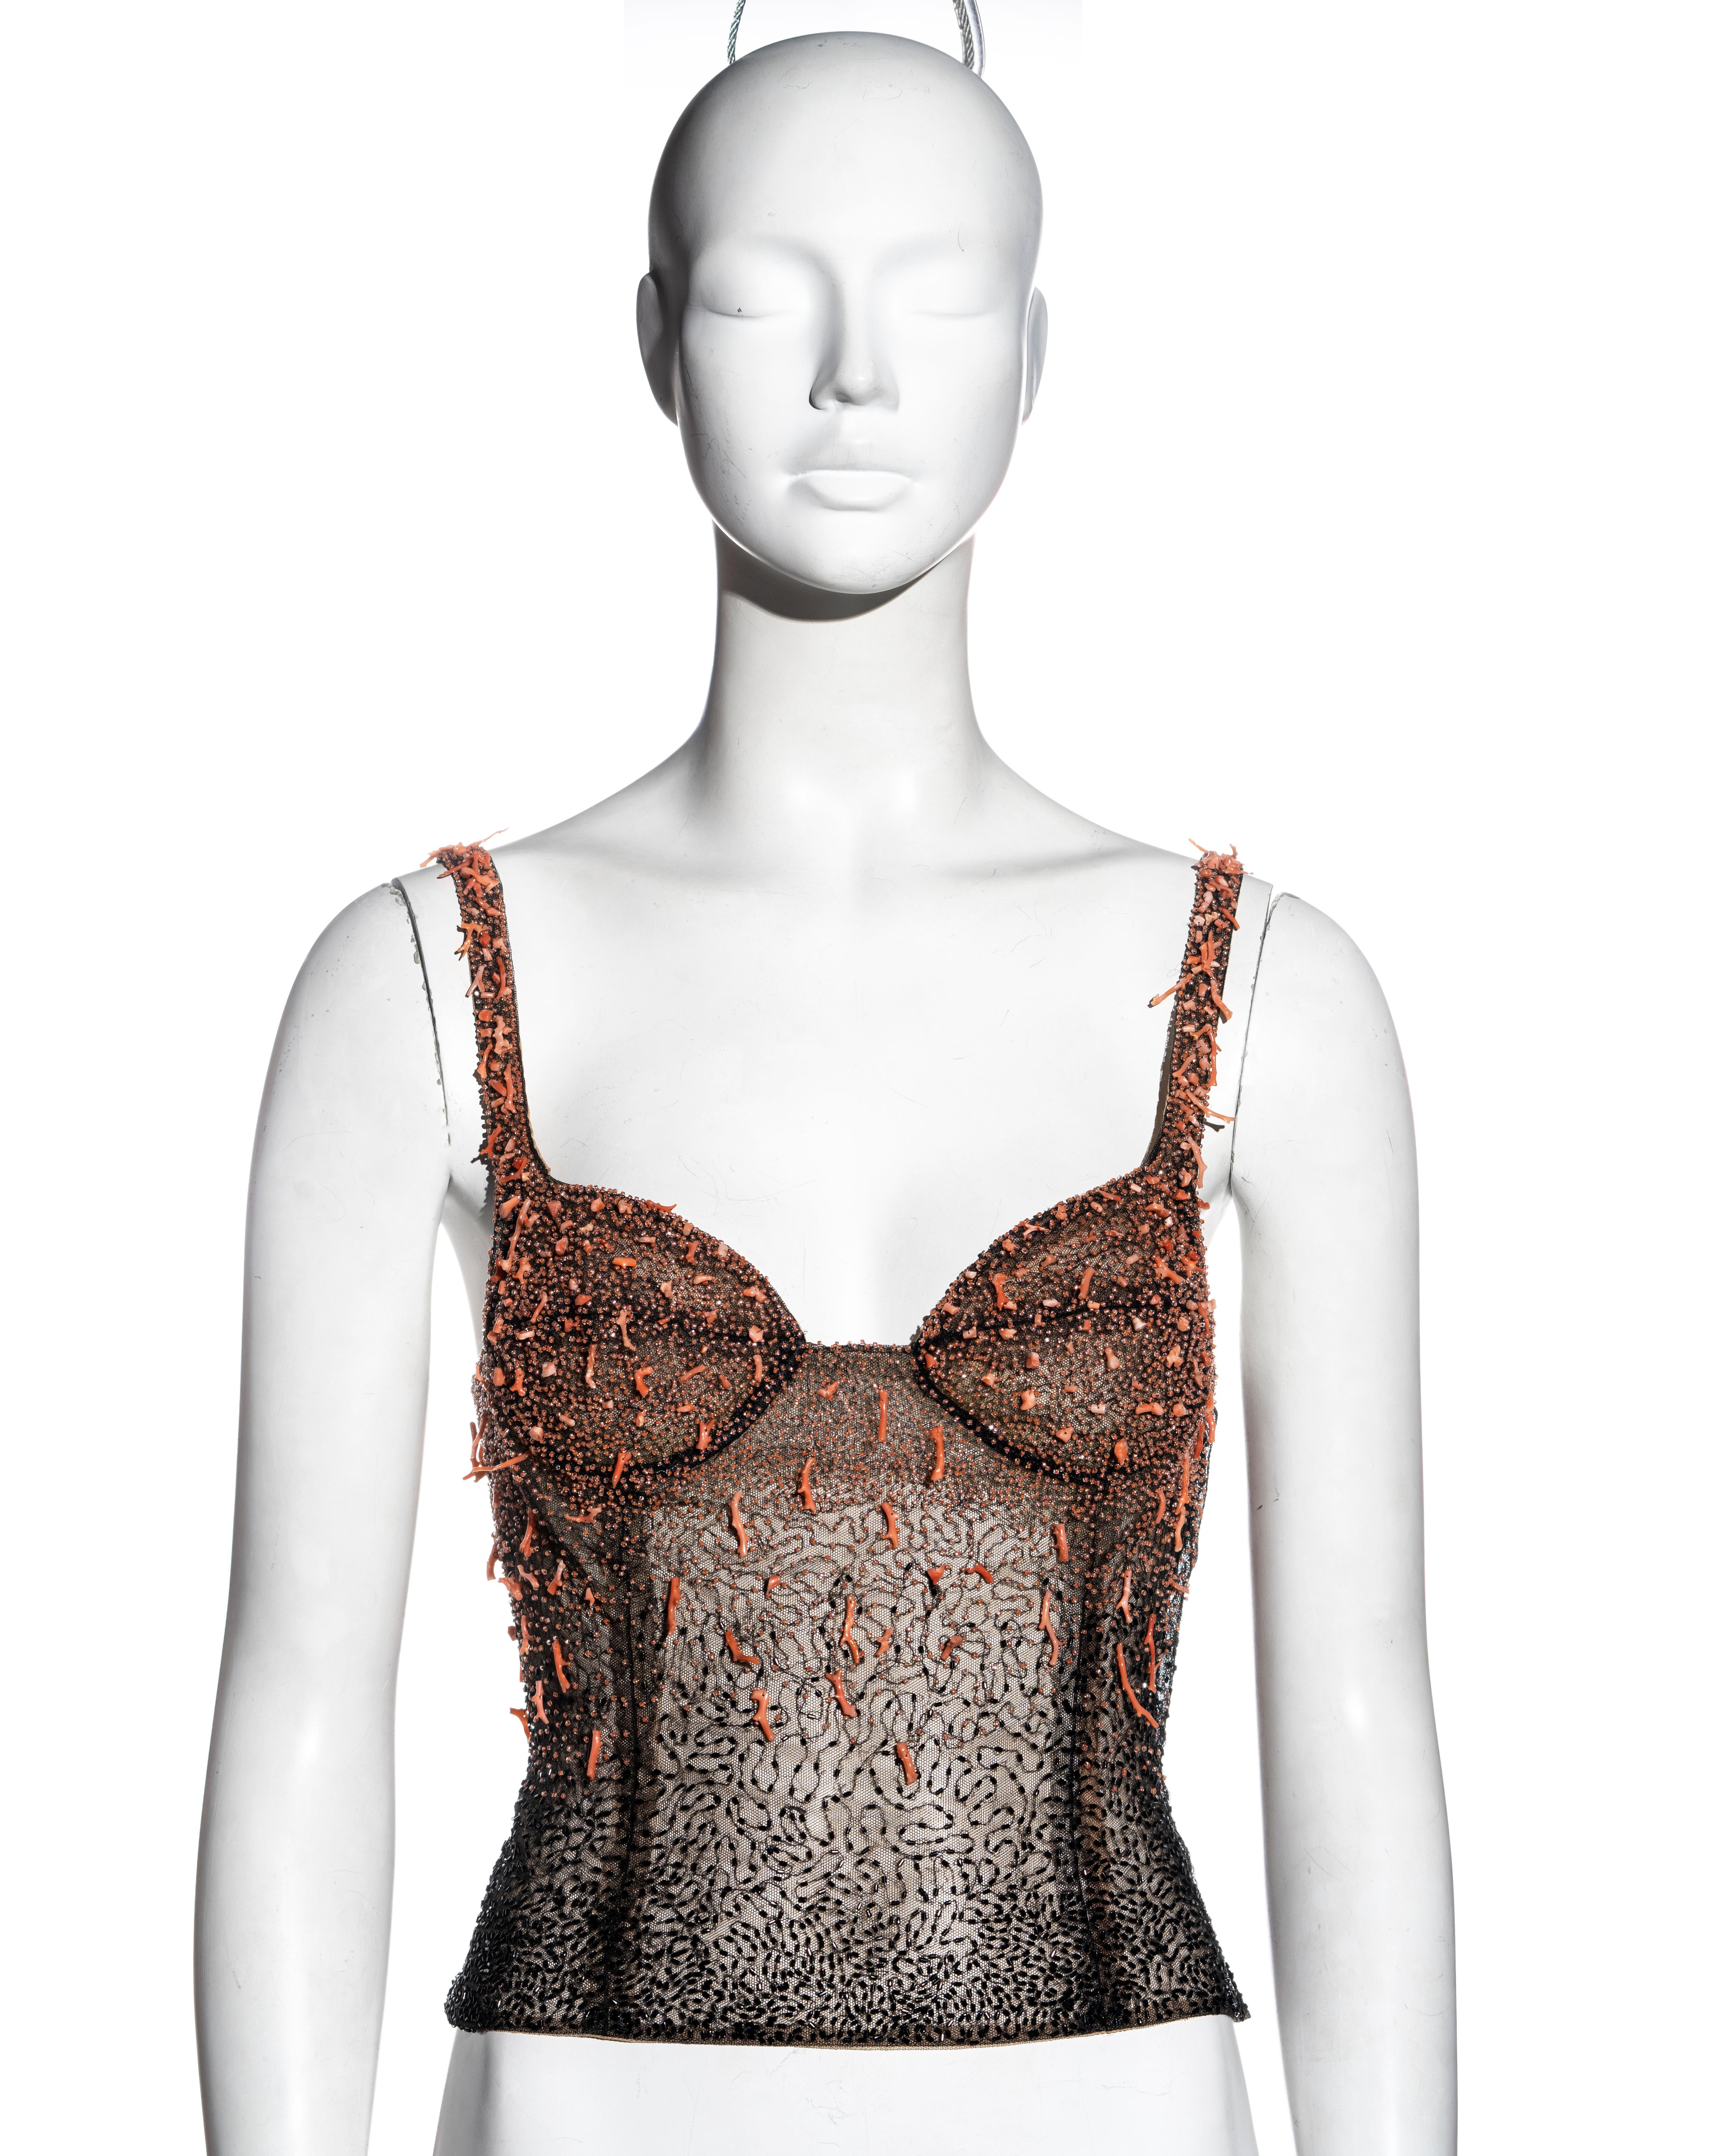 ▪ Gianni Versace black beaded mesh corset top
▪ Black and coral beading
▪ Coral branch embellishments 
▪ Semi-sheer 
▪ IT 40 - FR 36 - UK 8 - US 4
▪ Fall-Winter 1999
▪ 100% Nylon 
▪ Made in Italy